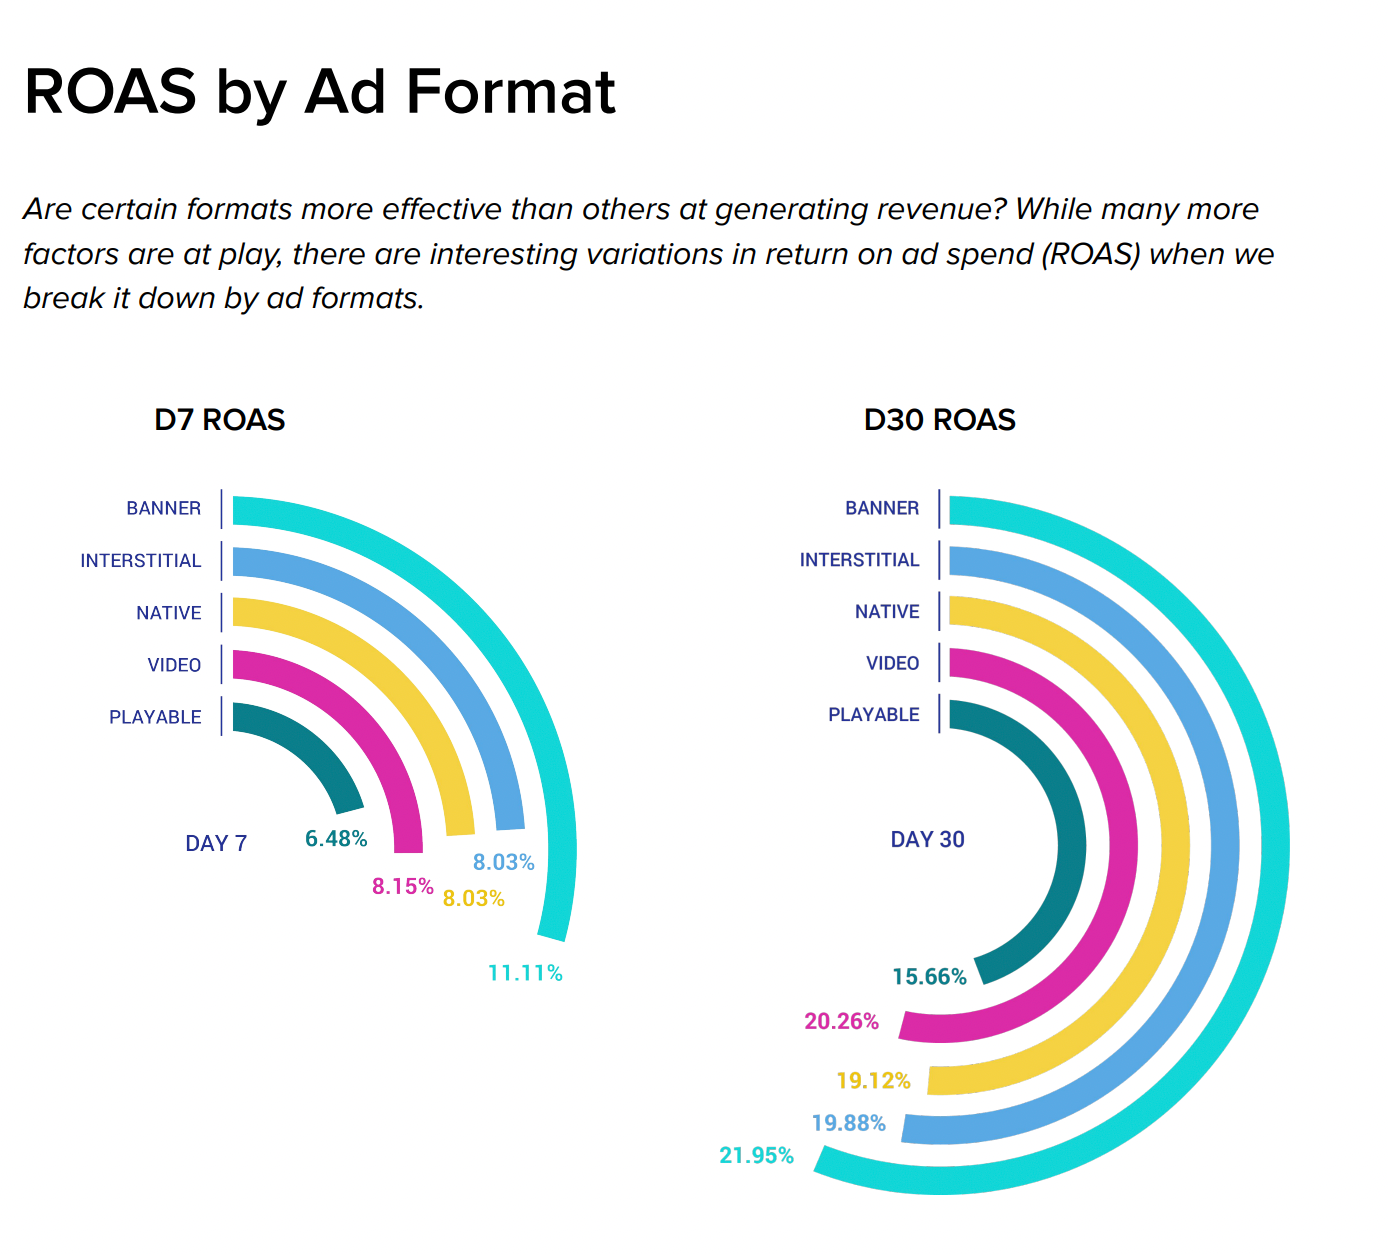 ROAS by ad format